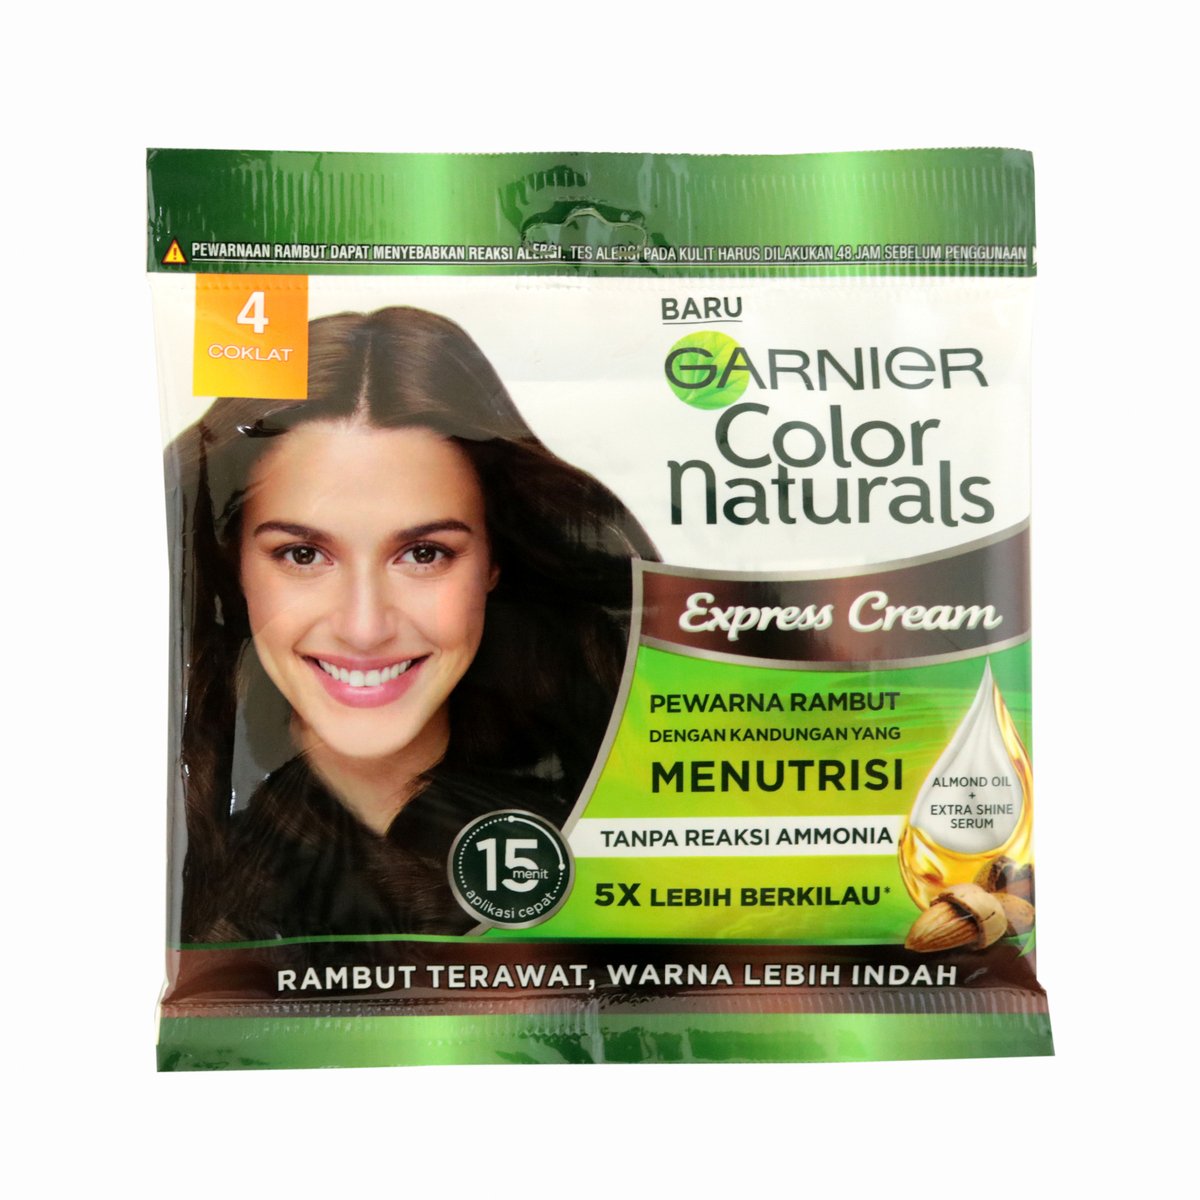 Garnier Hair Colour Natural Brown Shade 4 1Pcs Online at Best Price |  Permanent Colorants | Lulu Malaysia